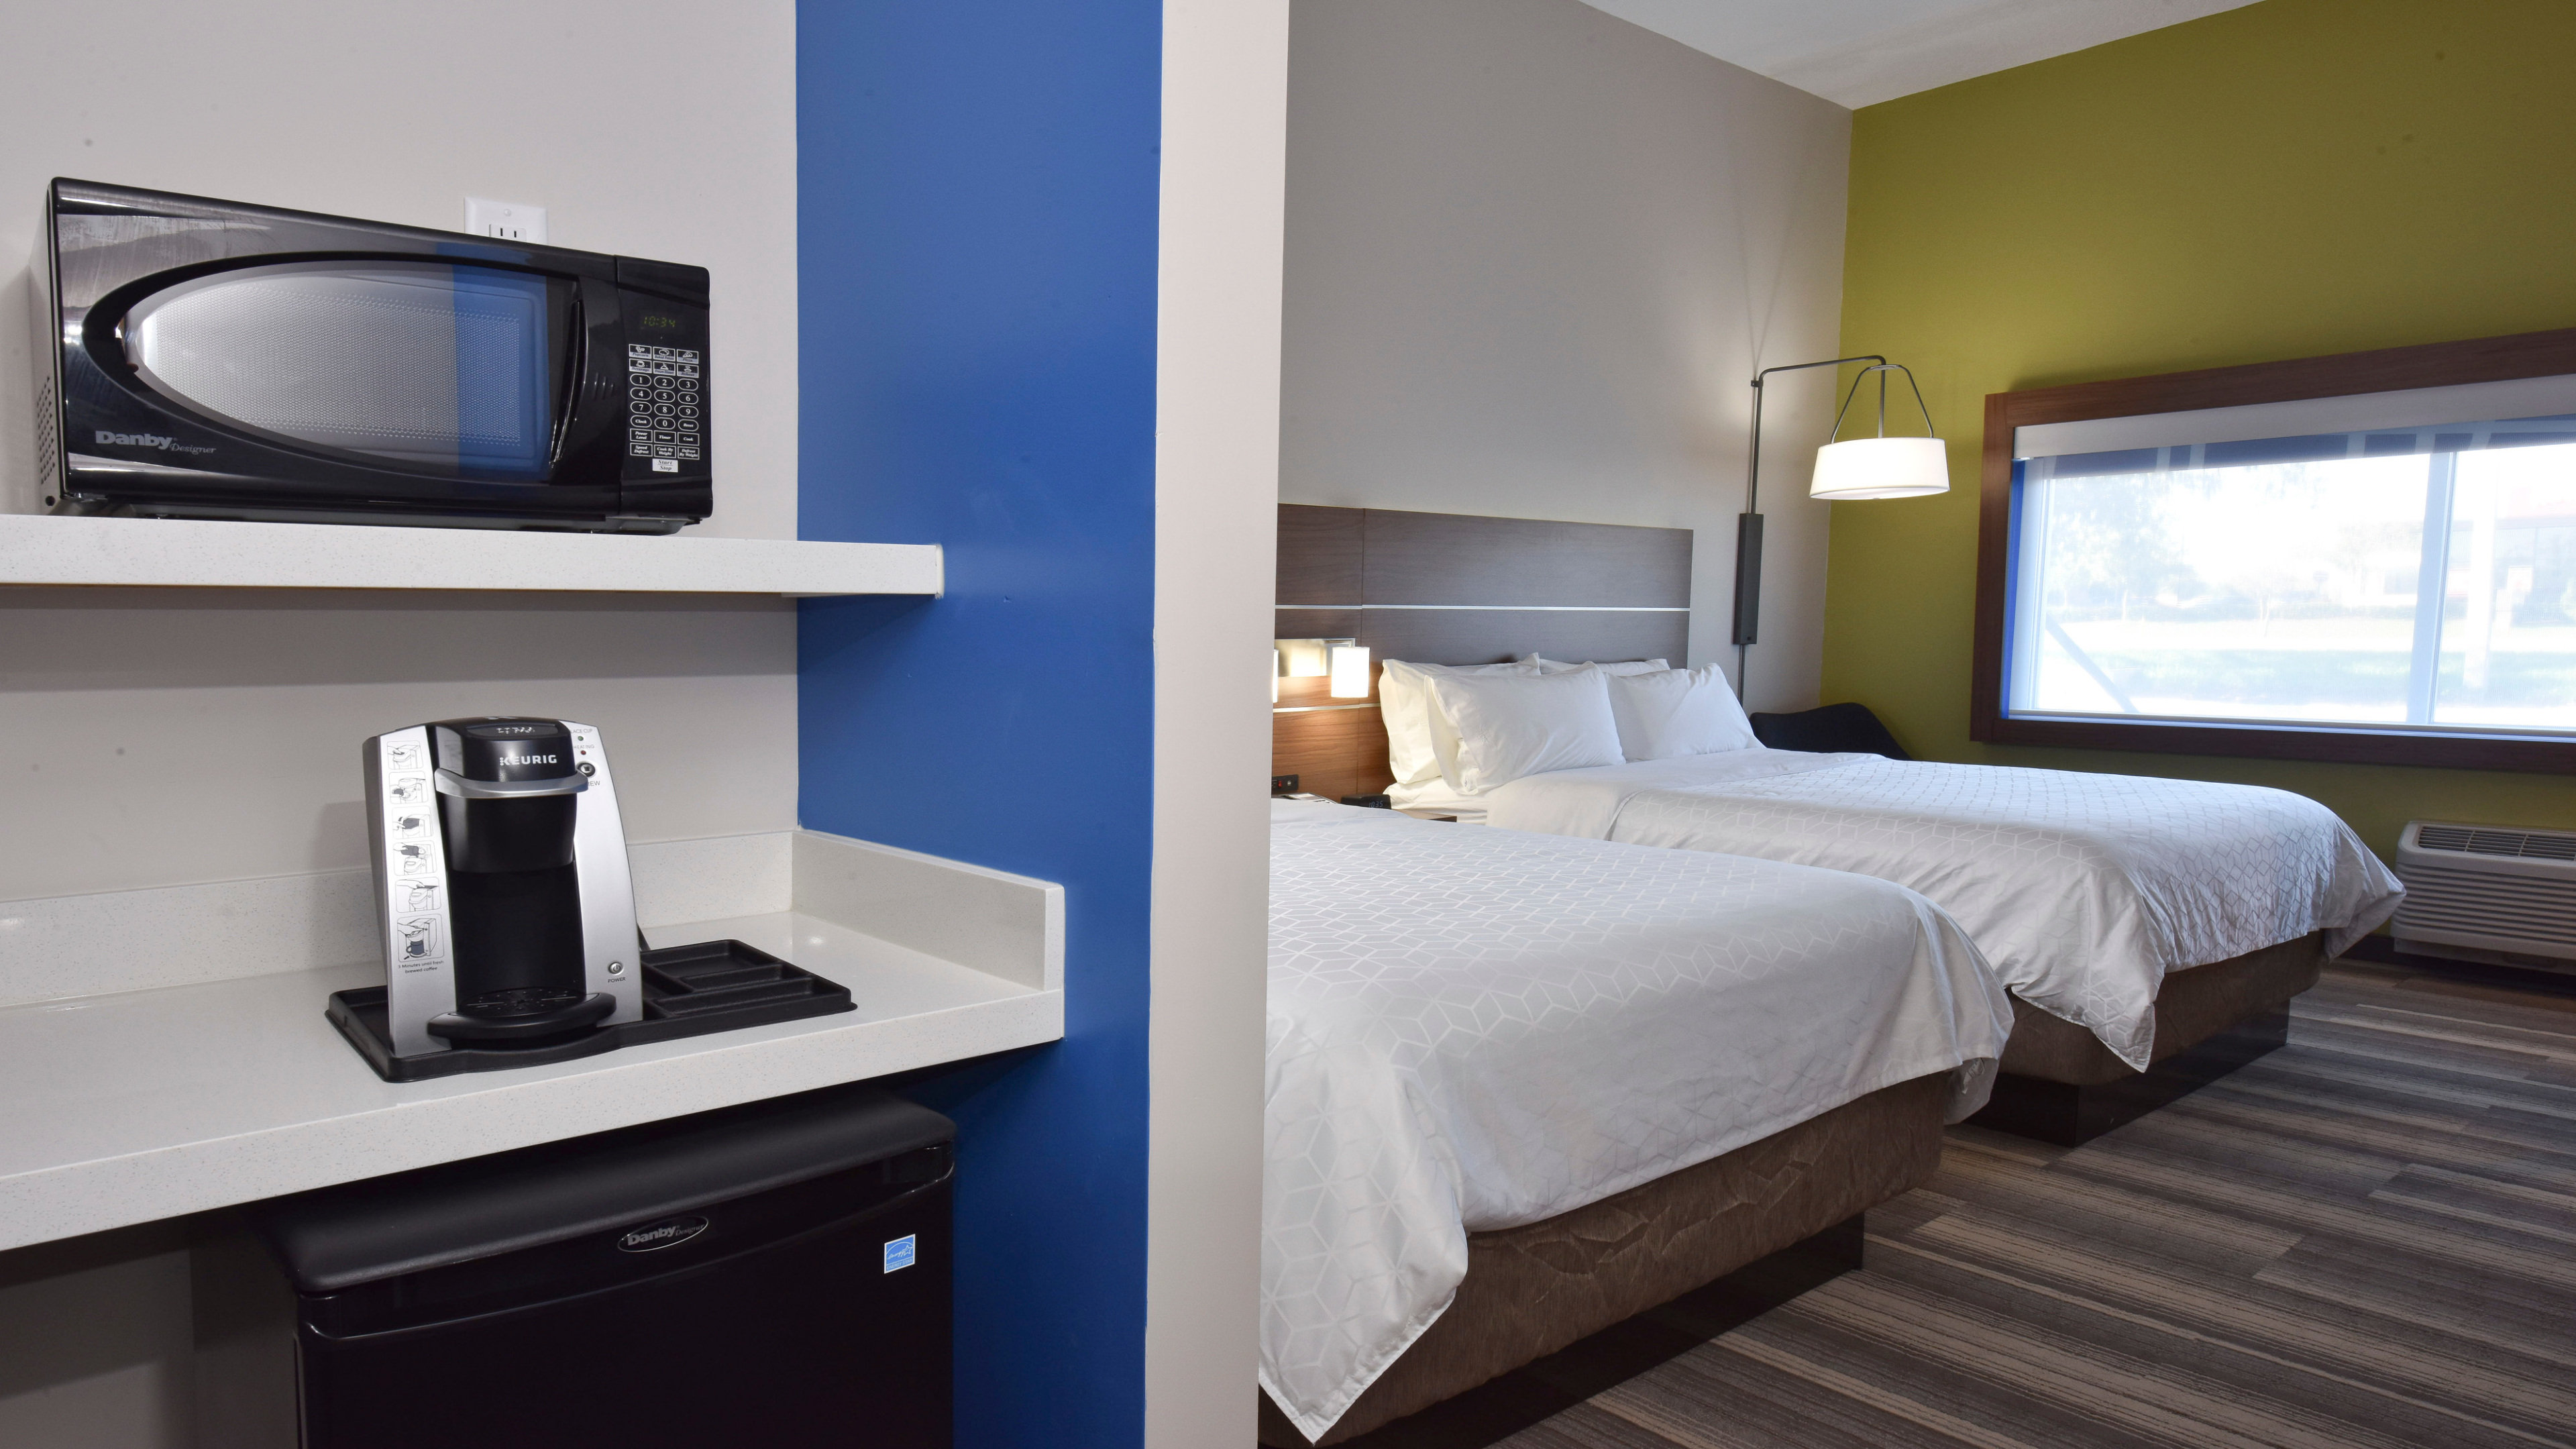 Keurig/coffee machine, oven and fridge are available in your room.